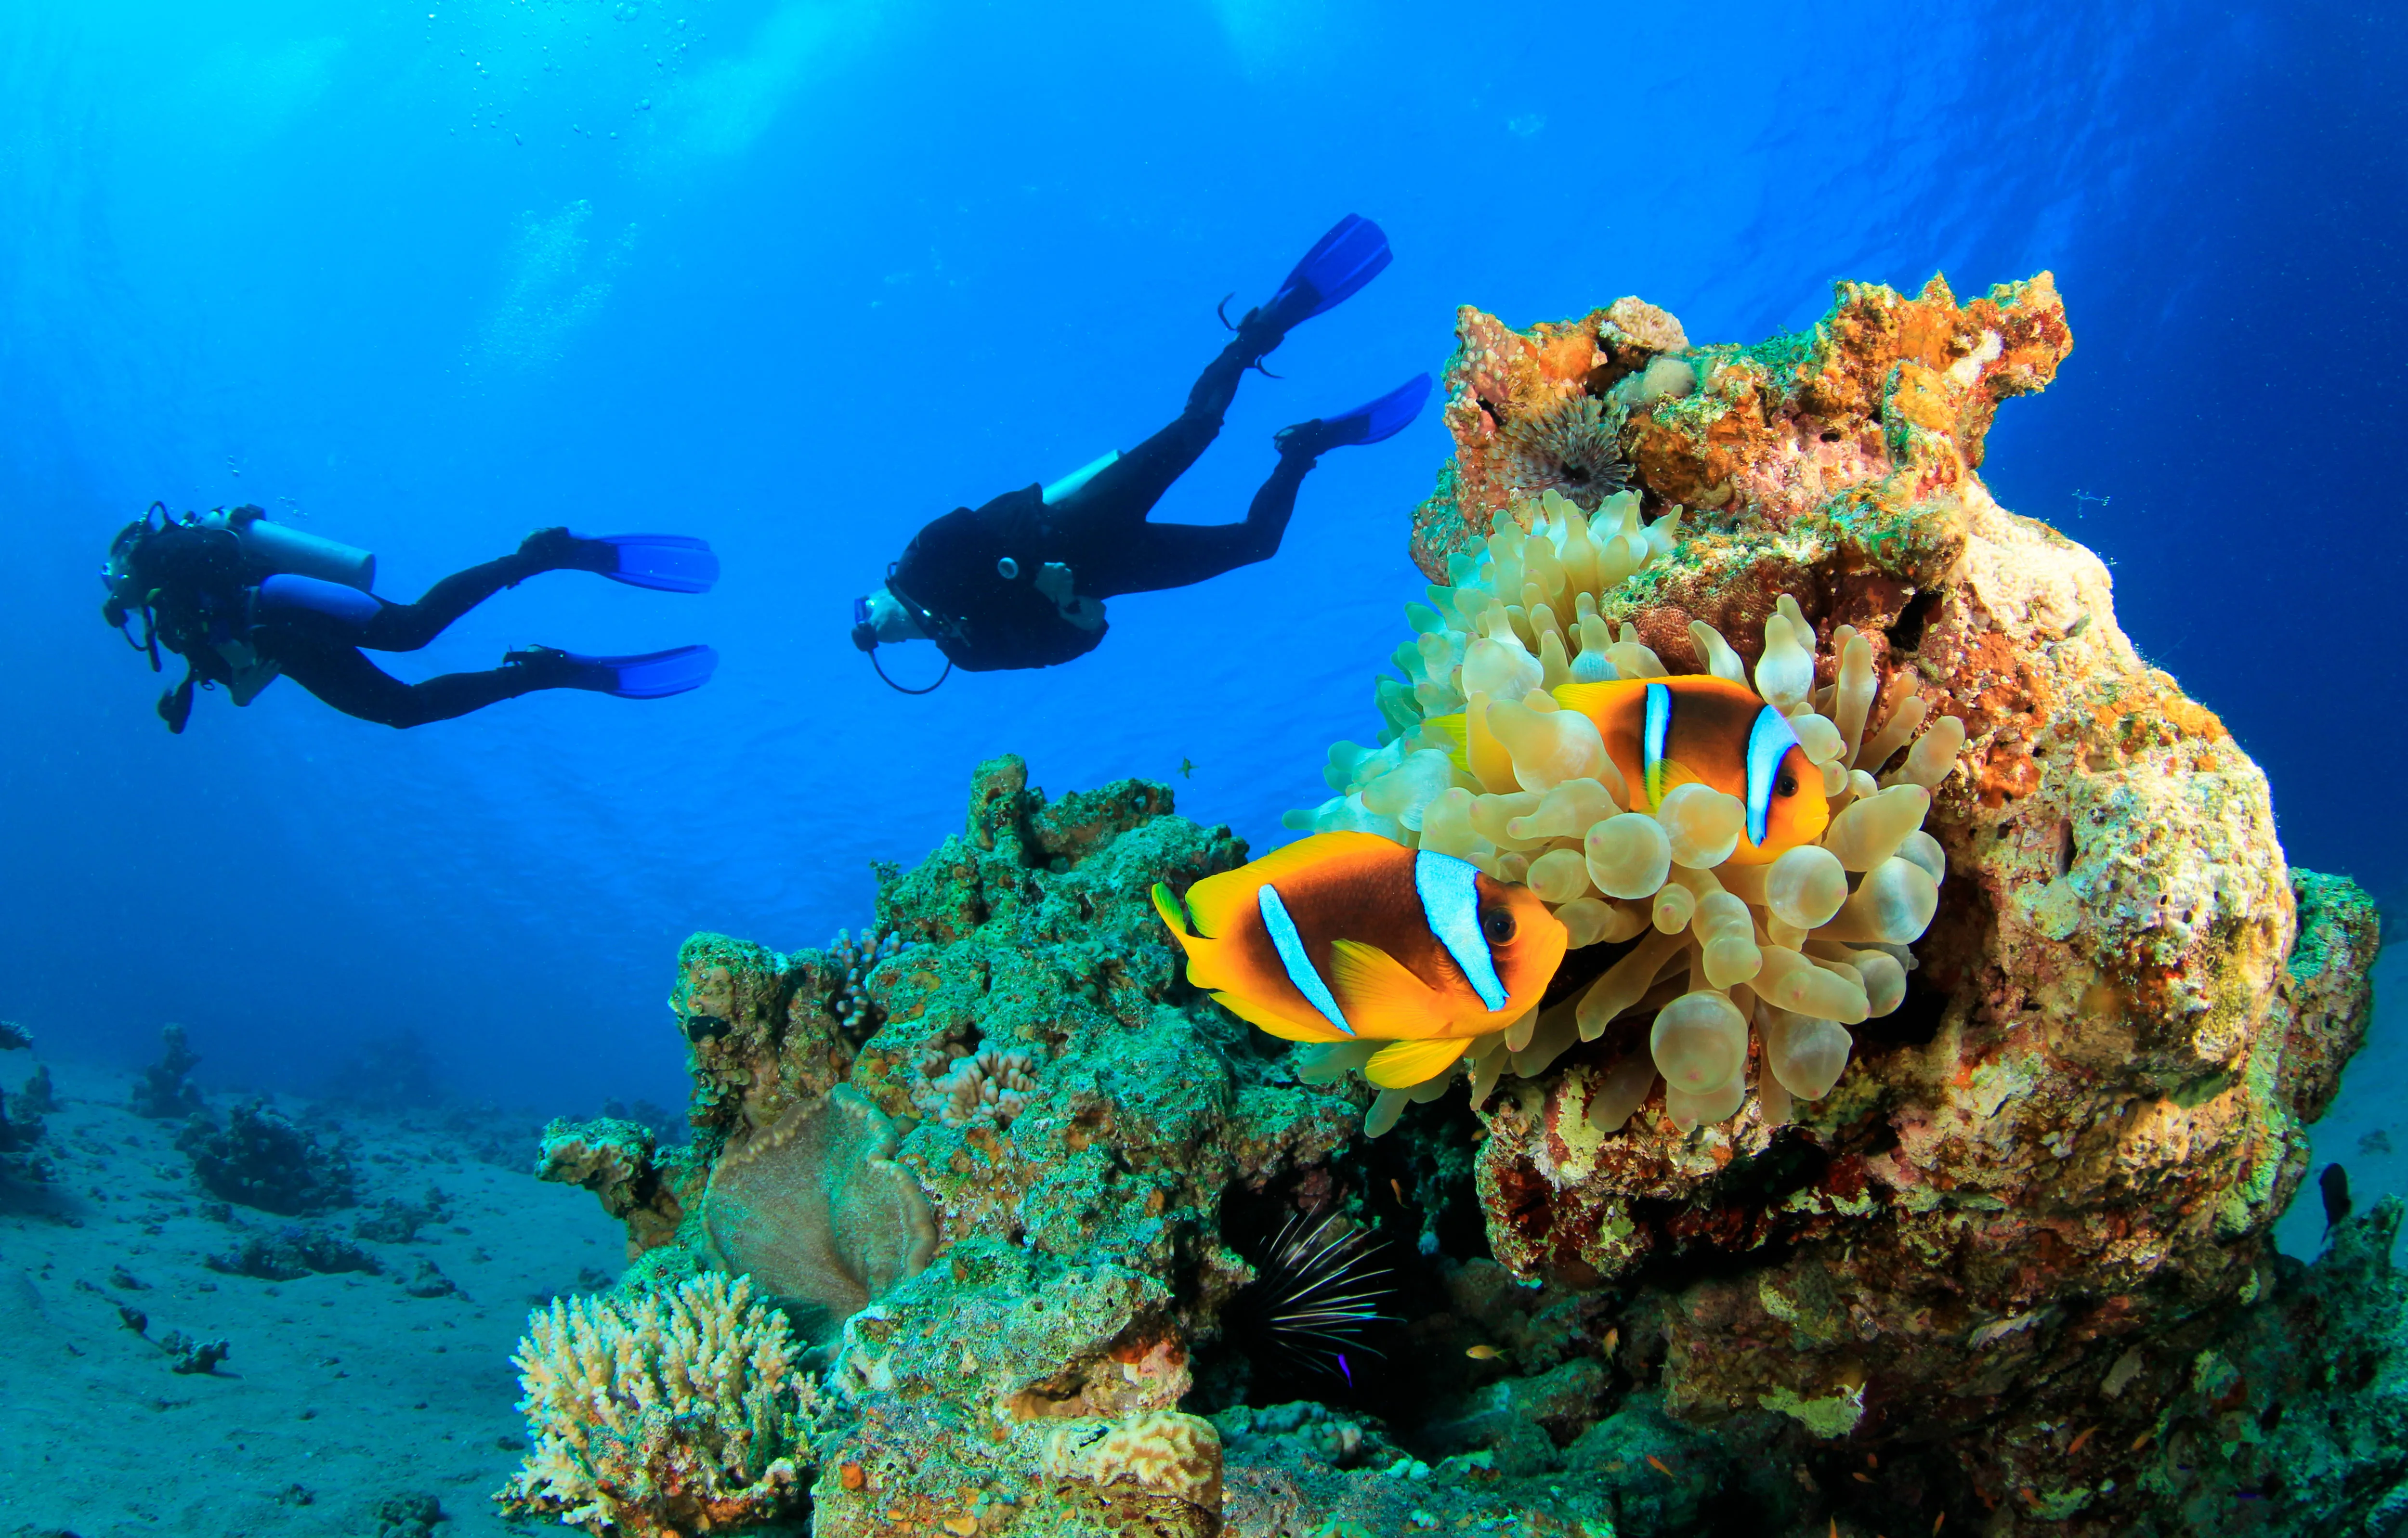 Acuba diving in one of the greatest Coral Reefs